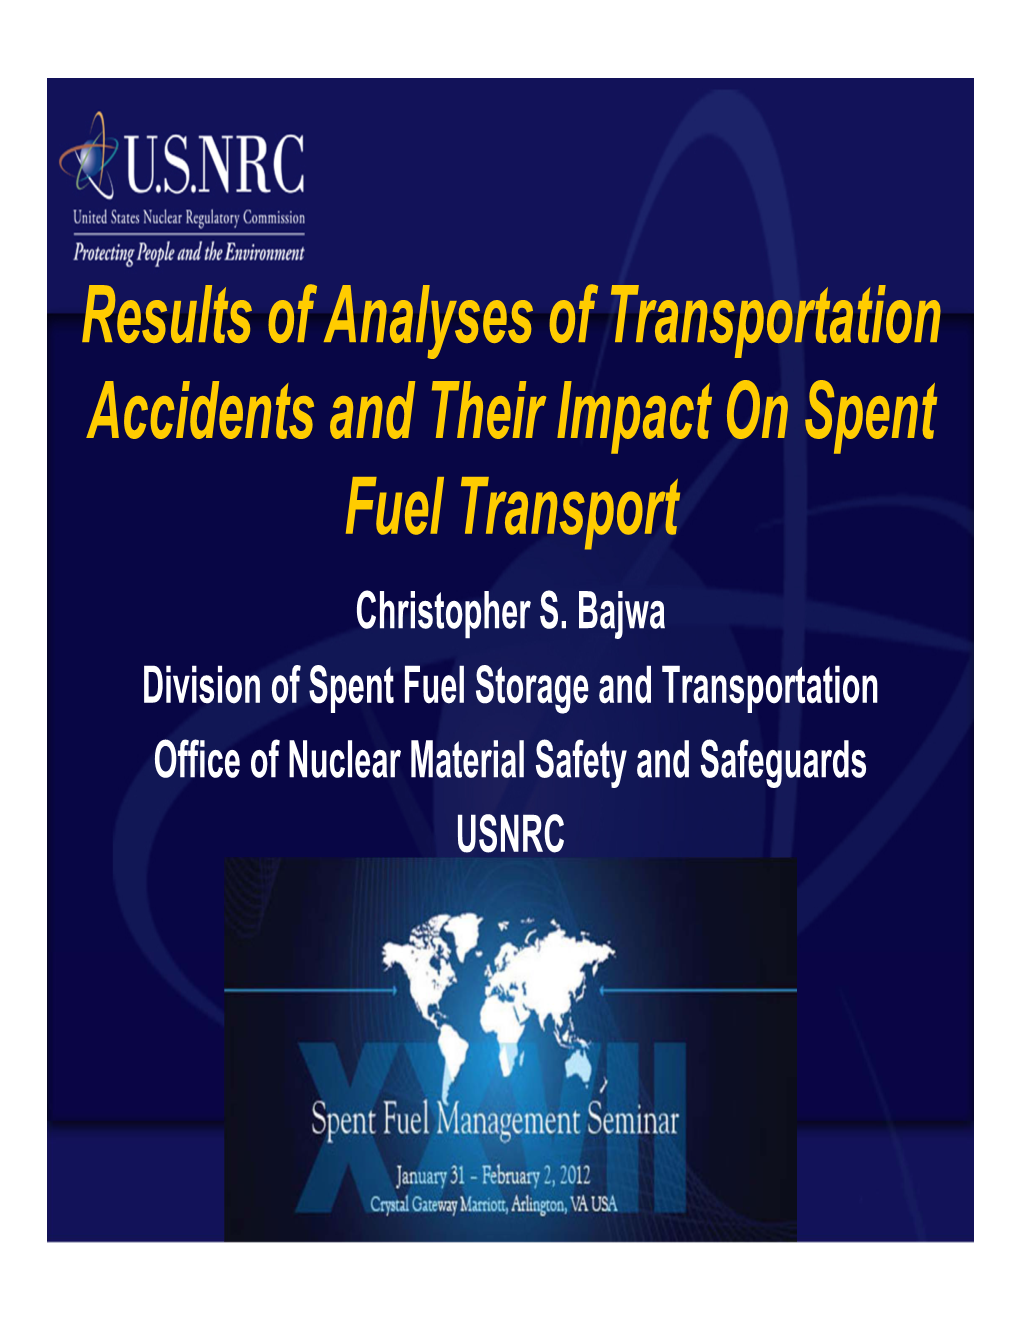 Results of Analyses of Transportation Accidents and Their Impact on Spent Fuel Transport Christopher S